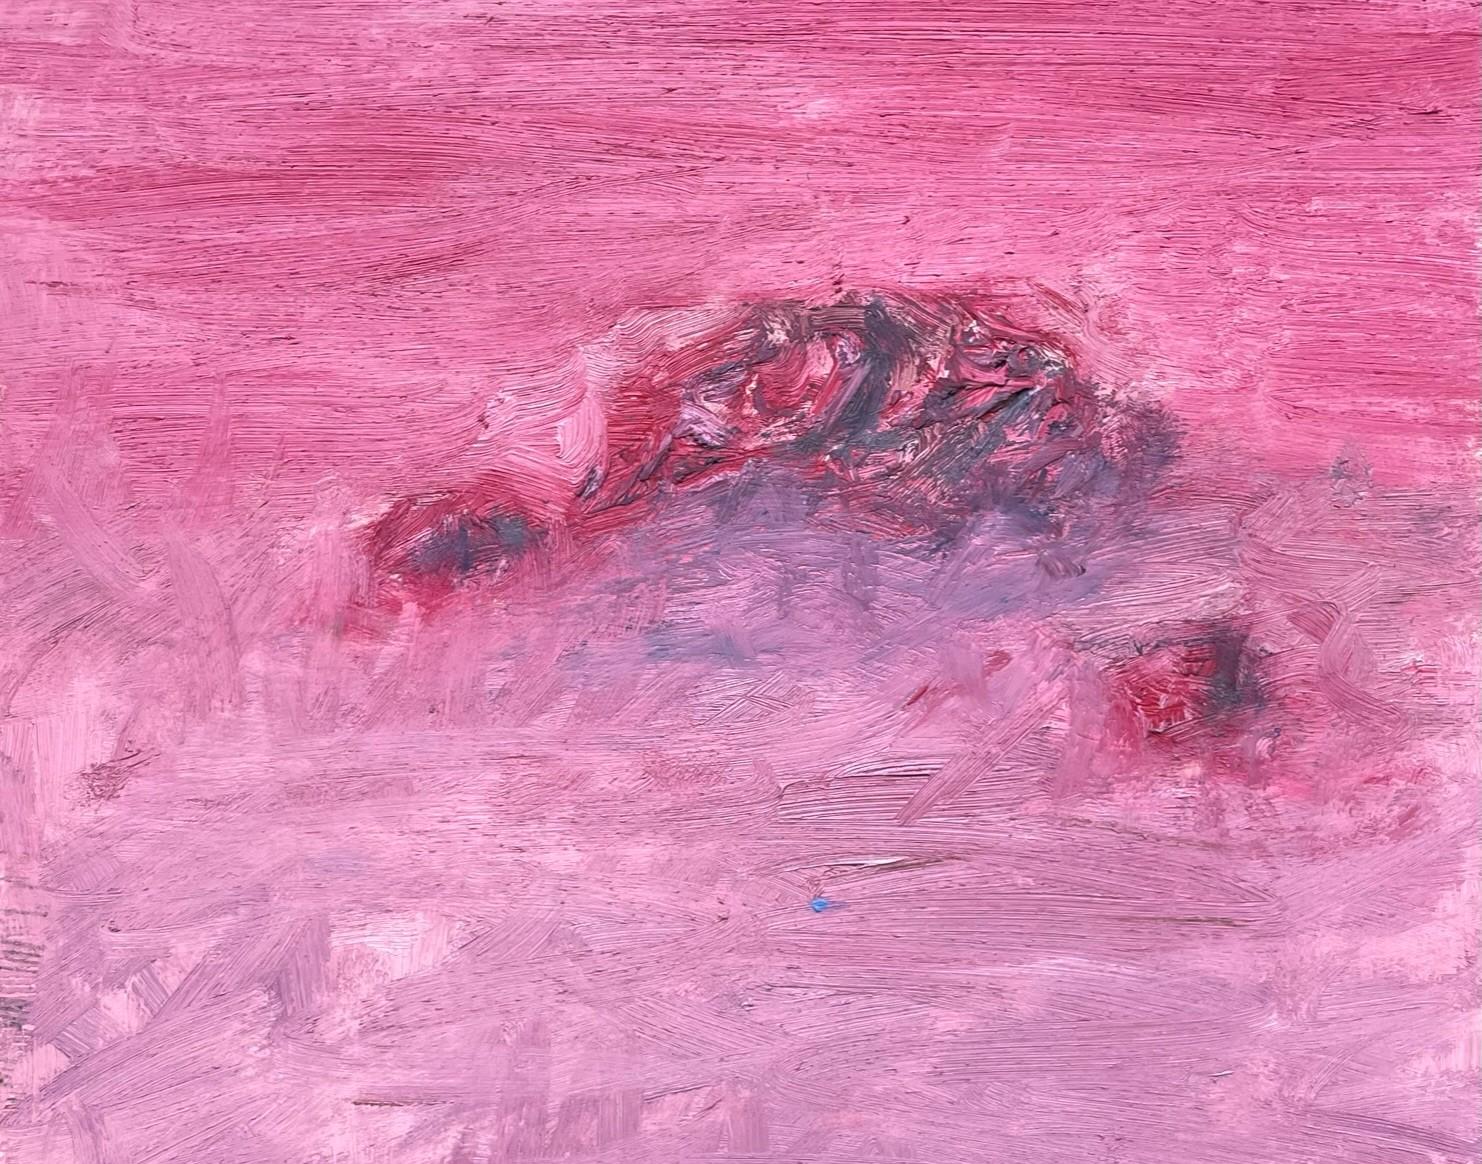 Remains (Body in the Field 10) - 21st Century, Abstract, Pink, Contemporary - Purple Landscape Art by Zsolt Berszán